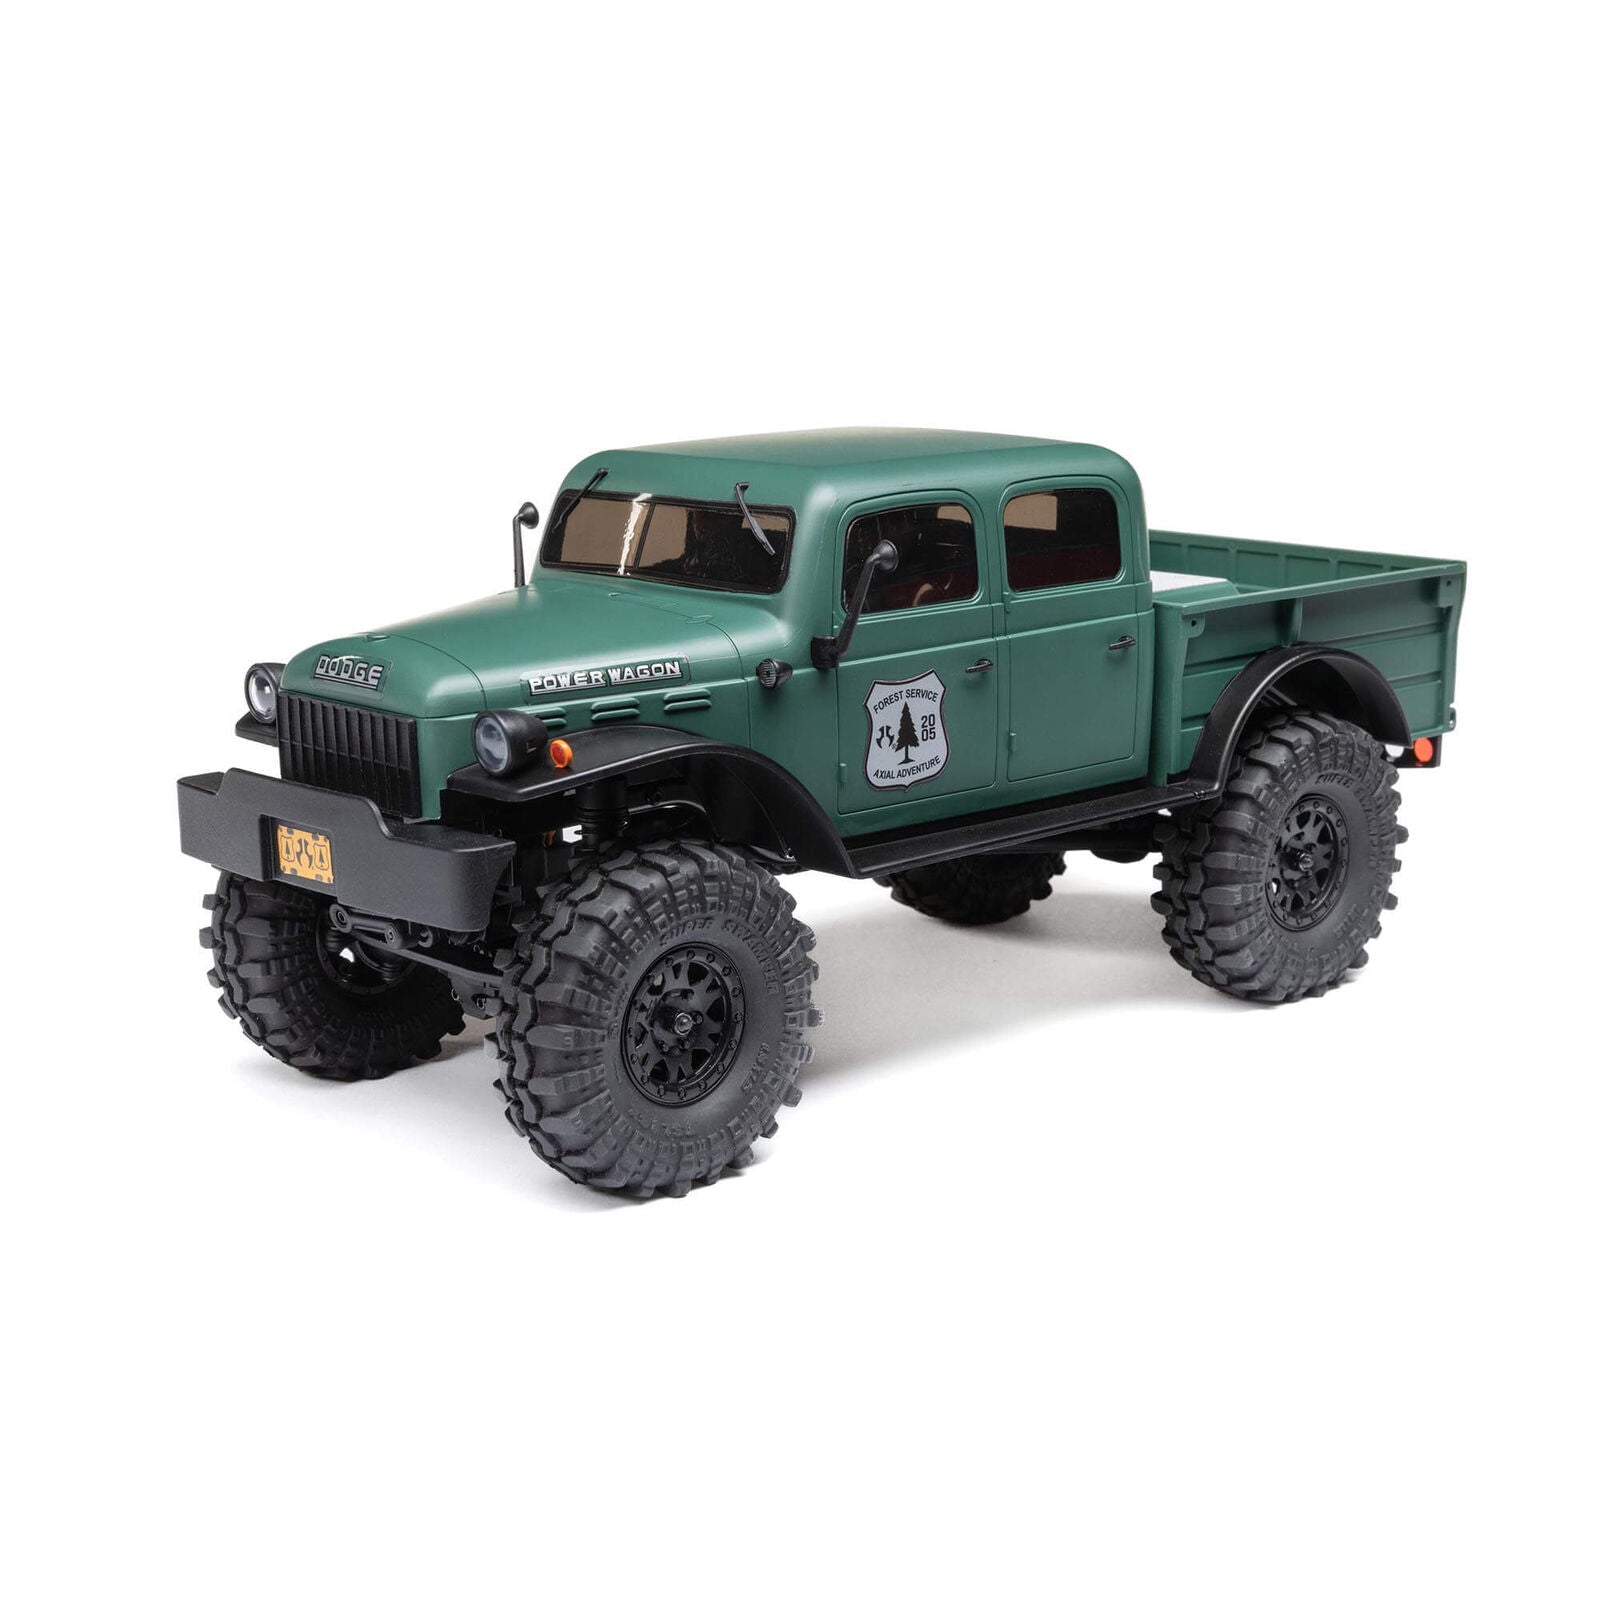 AXIAL AXI00007 1/24 SCX24 Dodge Power Wagon 4WD Rock Crawler Brushed RTR